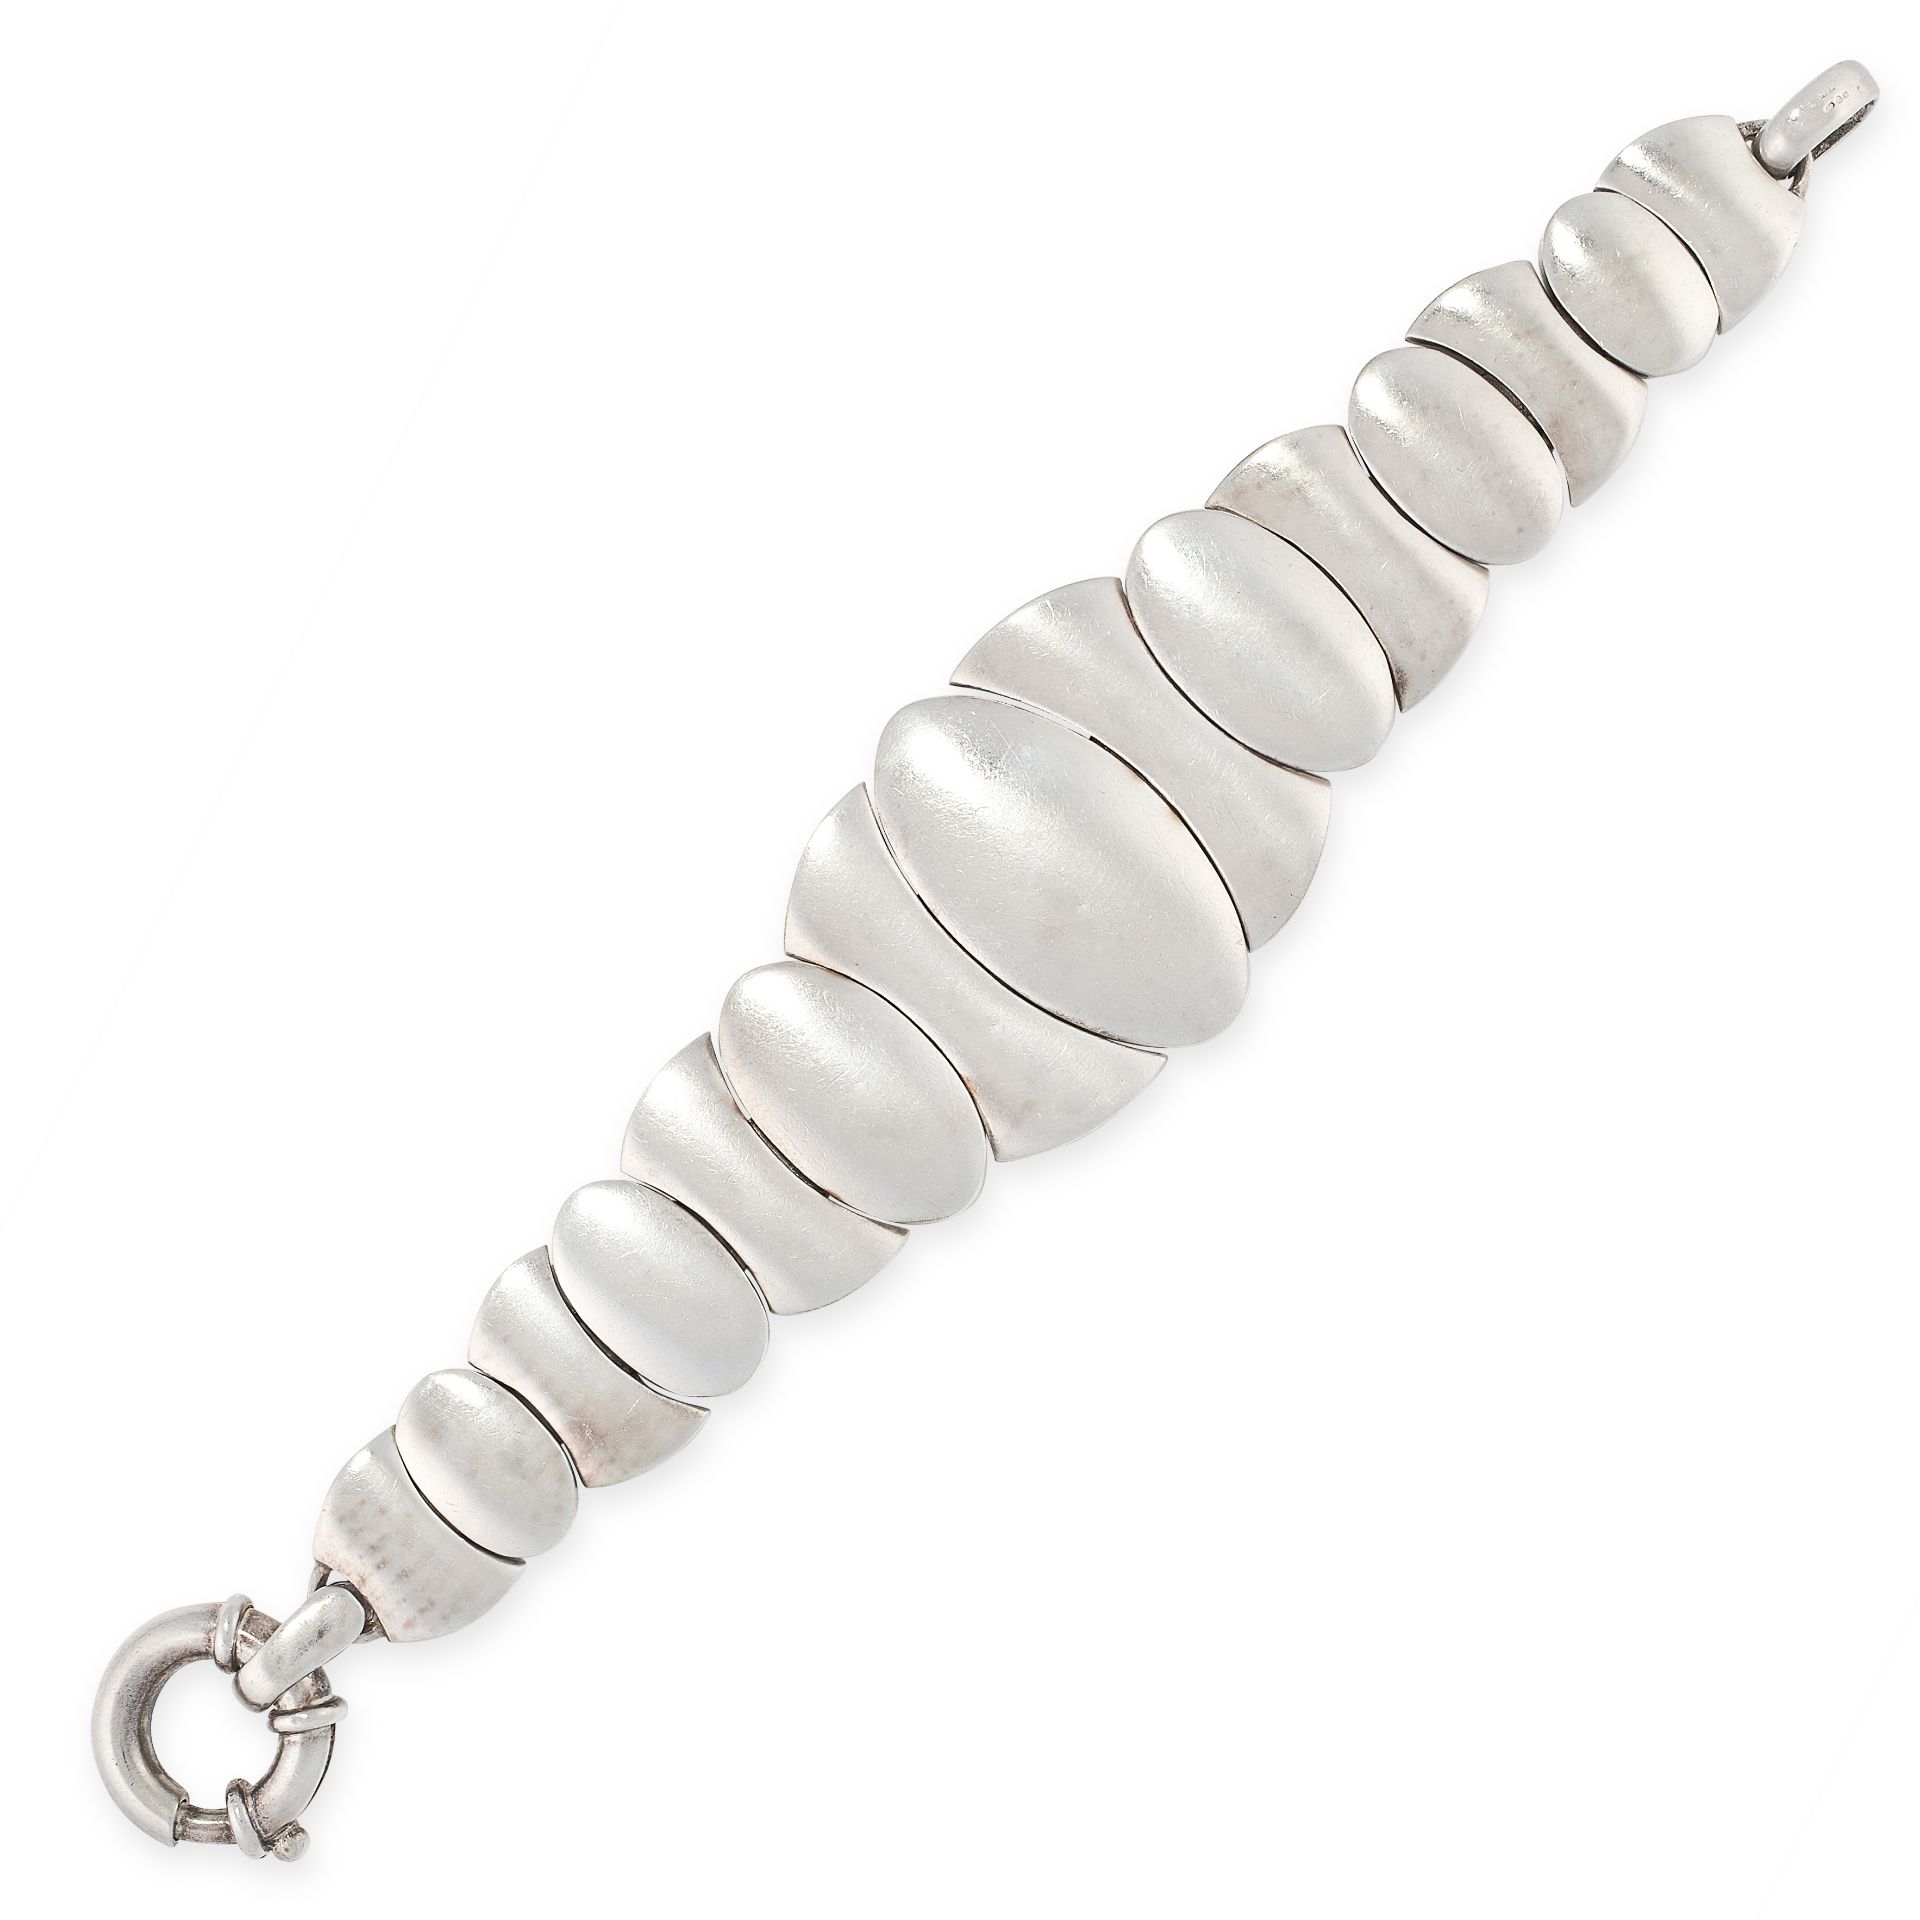 A VINTAGE SILVER BRACELET in sterling silver, formed of a graduated row of oval and crescent